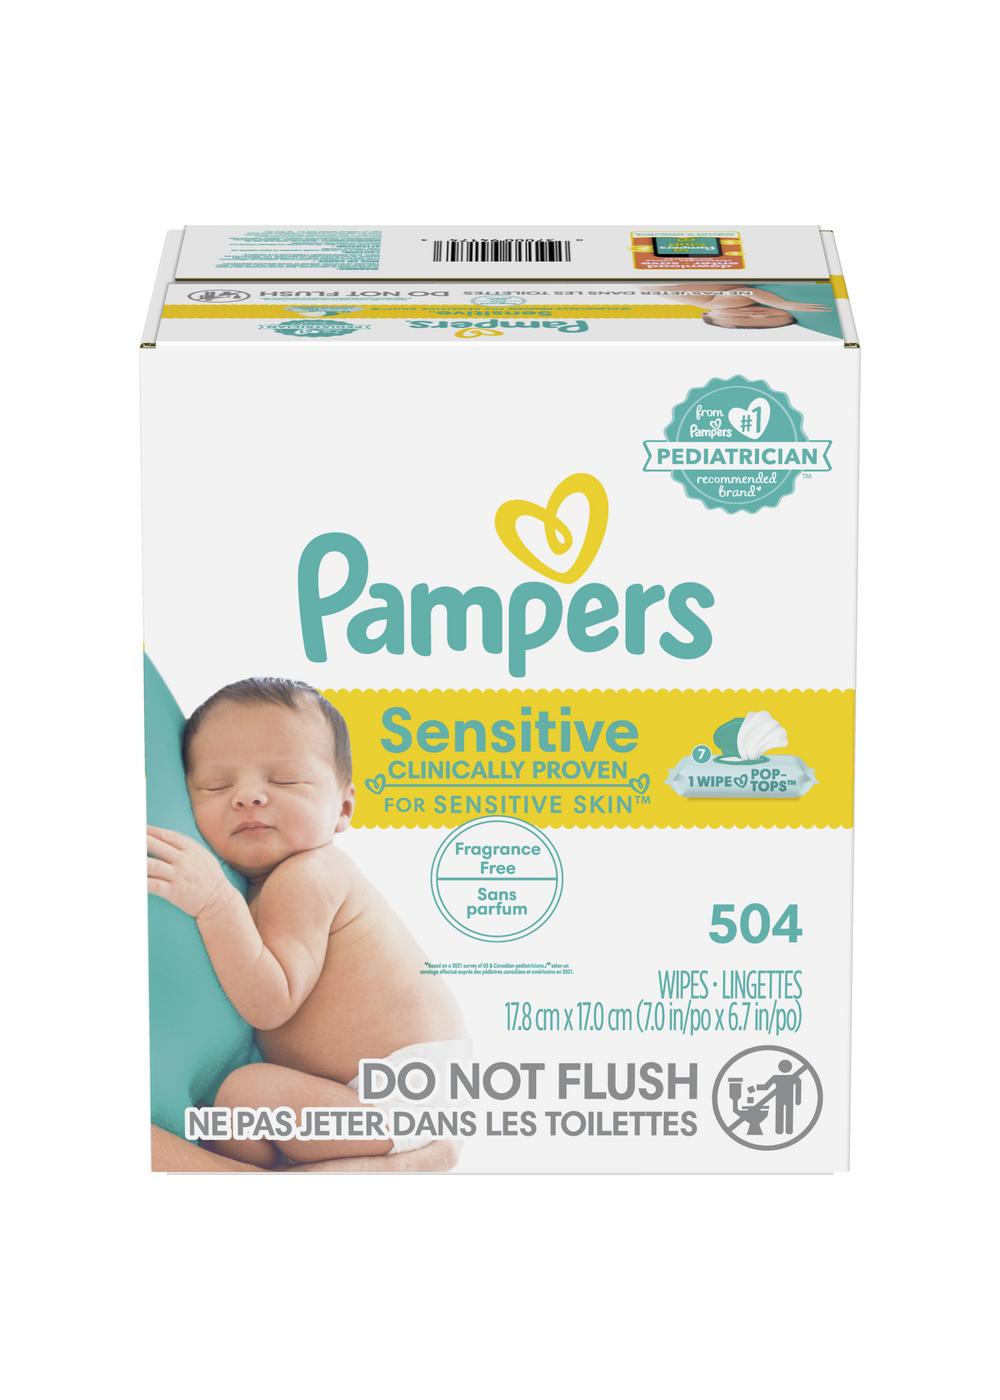 Pampers Sensitive Skin Baby Wipes 7 Pk; image 1 of 9